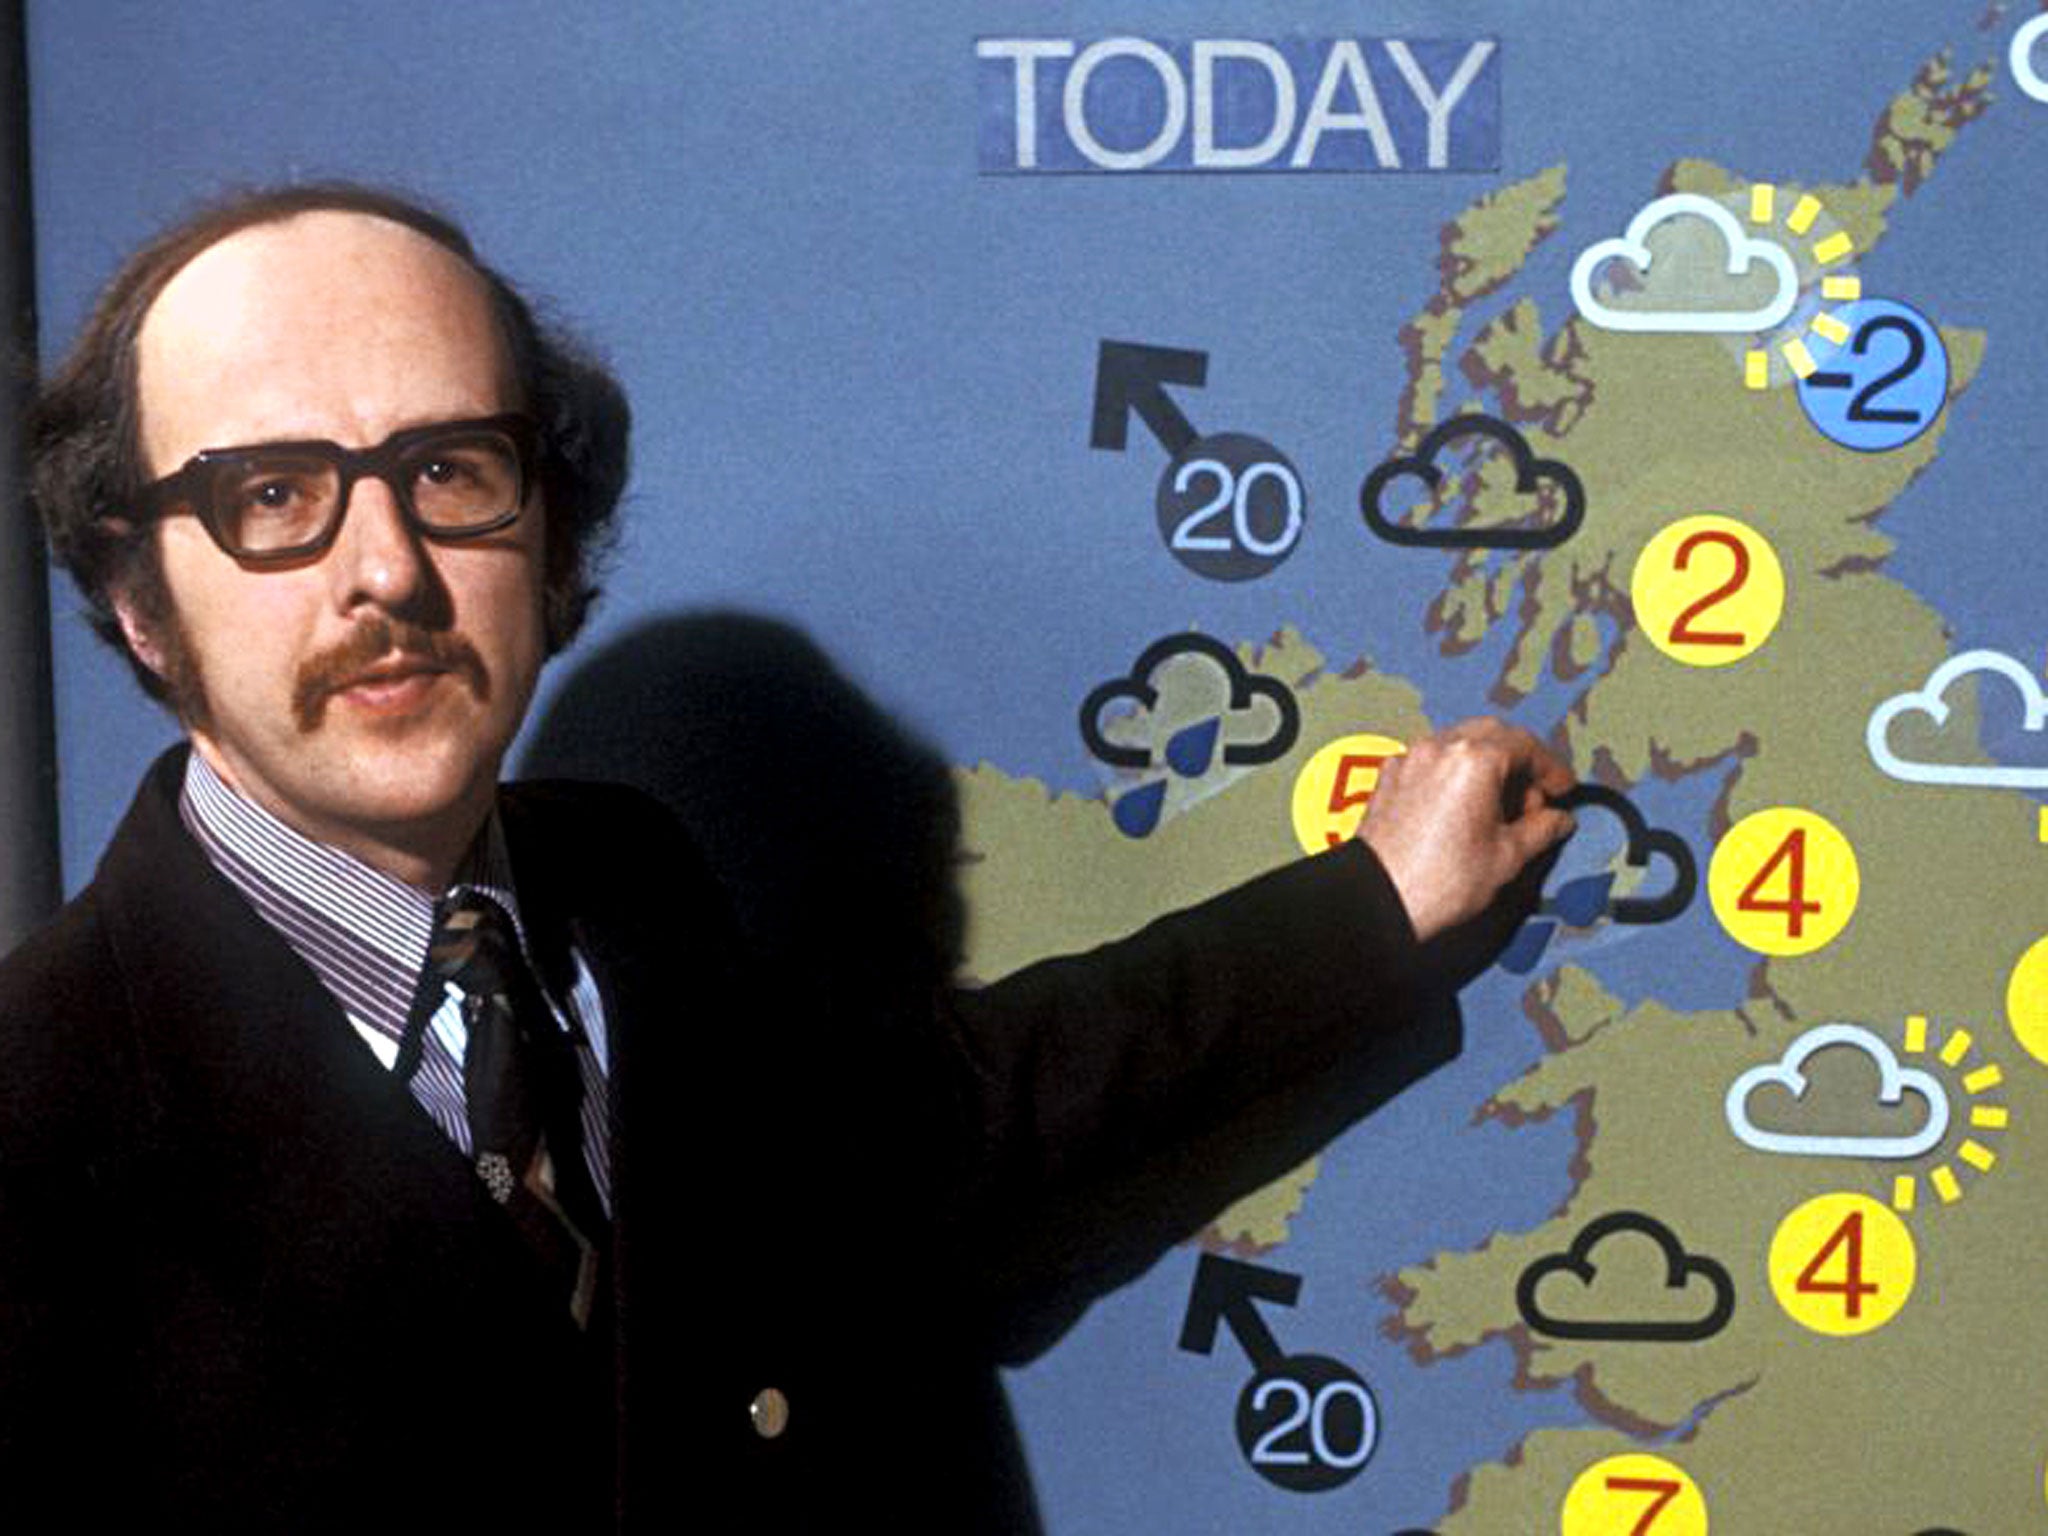 Calm before the storm: BBC weather forecaster Michael Fish in 1979